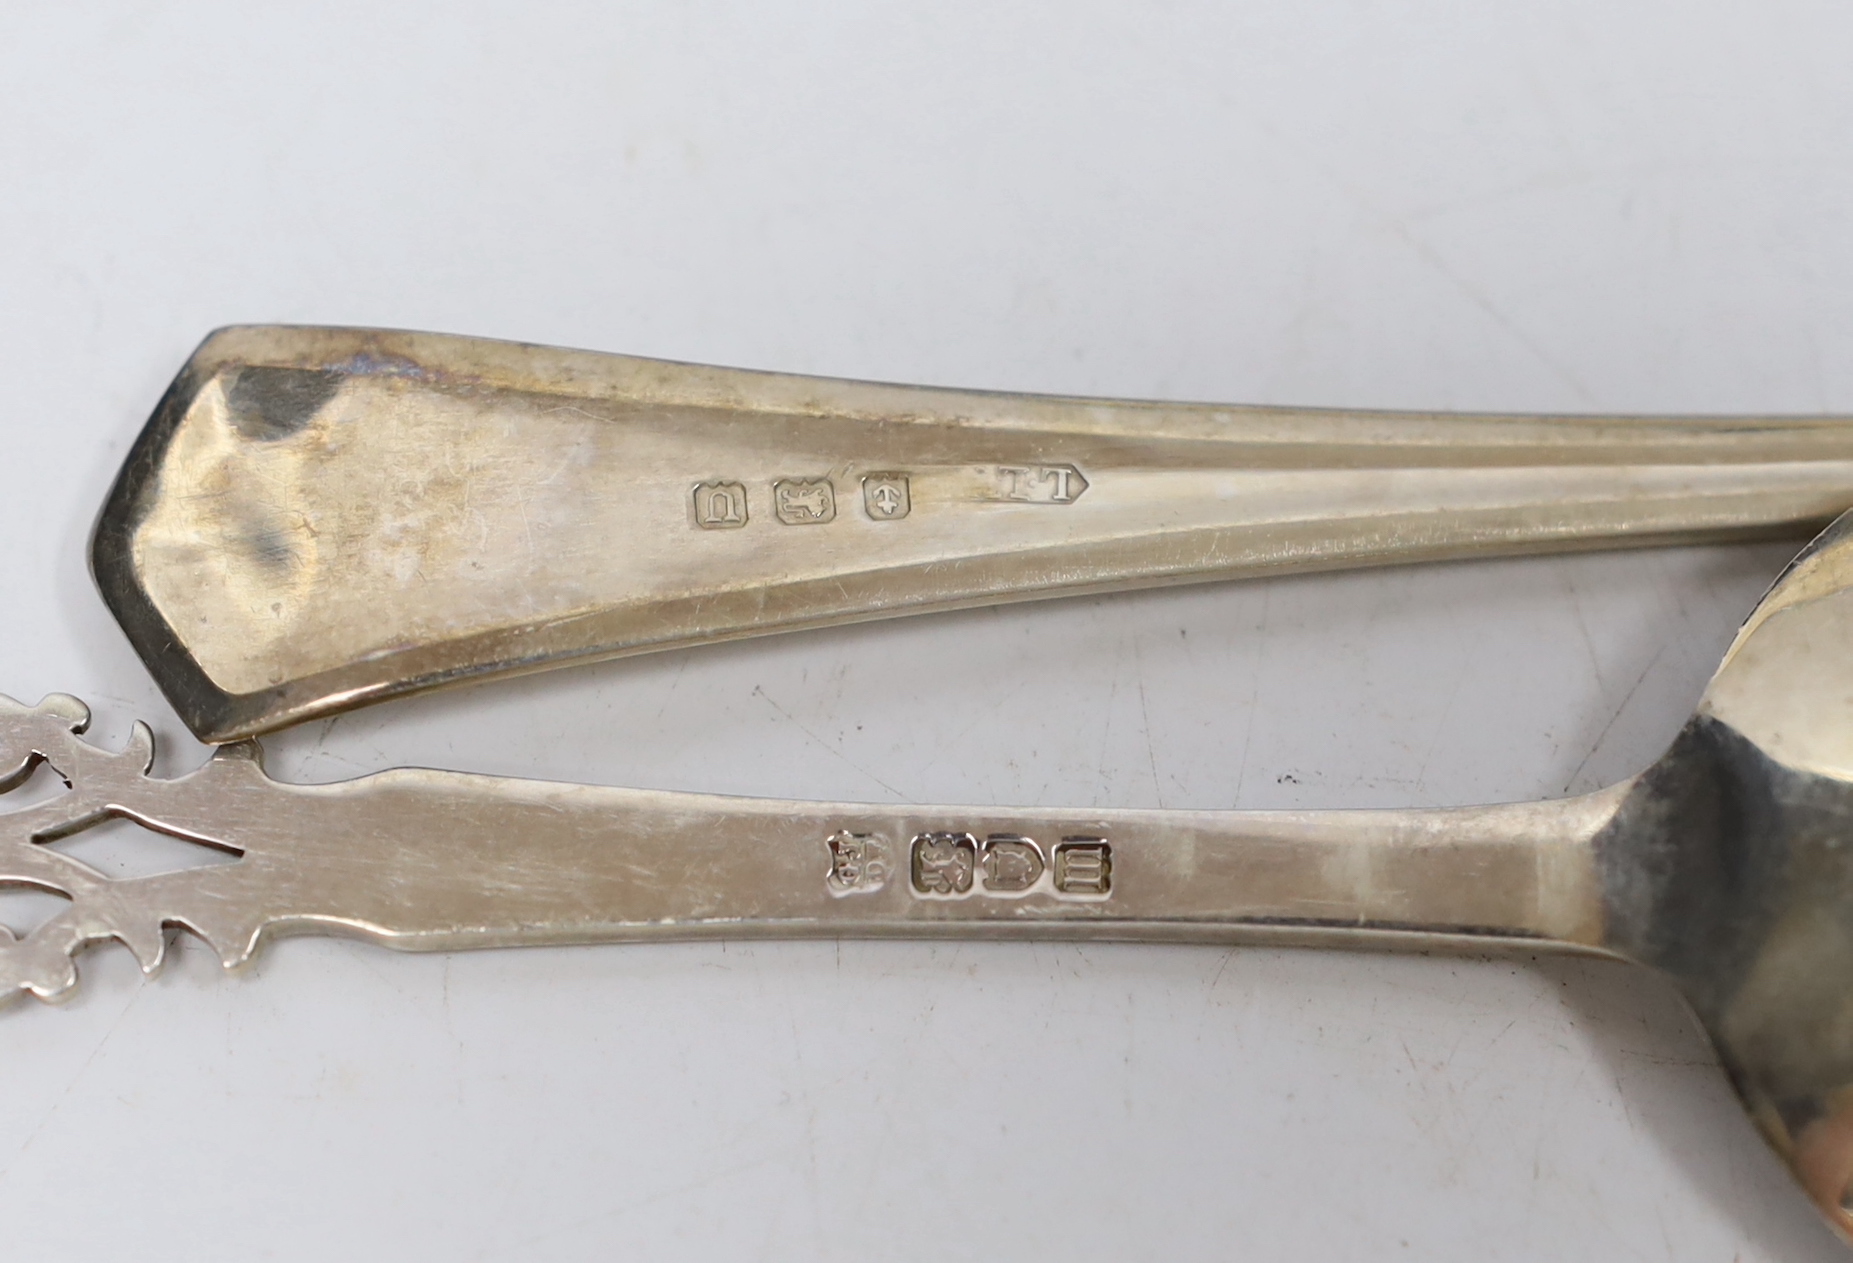 A cased pair of Edwardian silver serving spoons with pierced terminals, Josiah Williams & Co, London, 1907, 17.9cm and one other cased pair of silver servers.